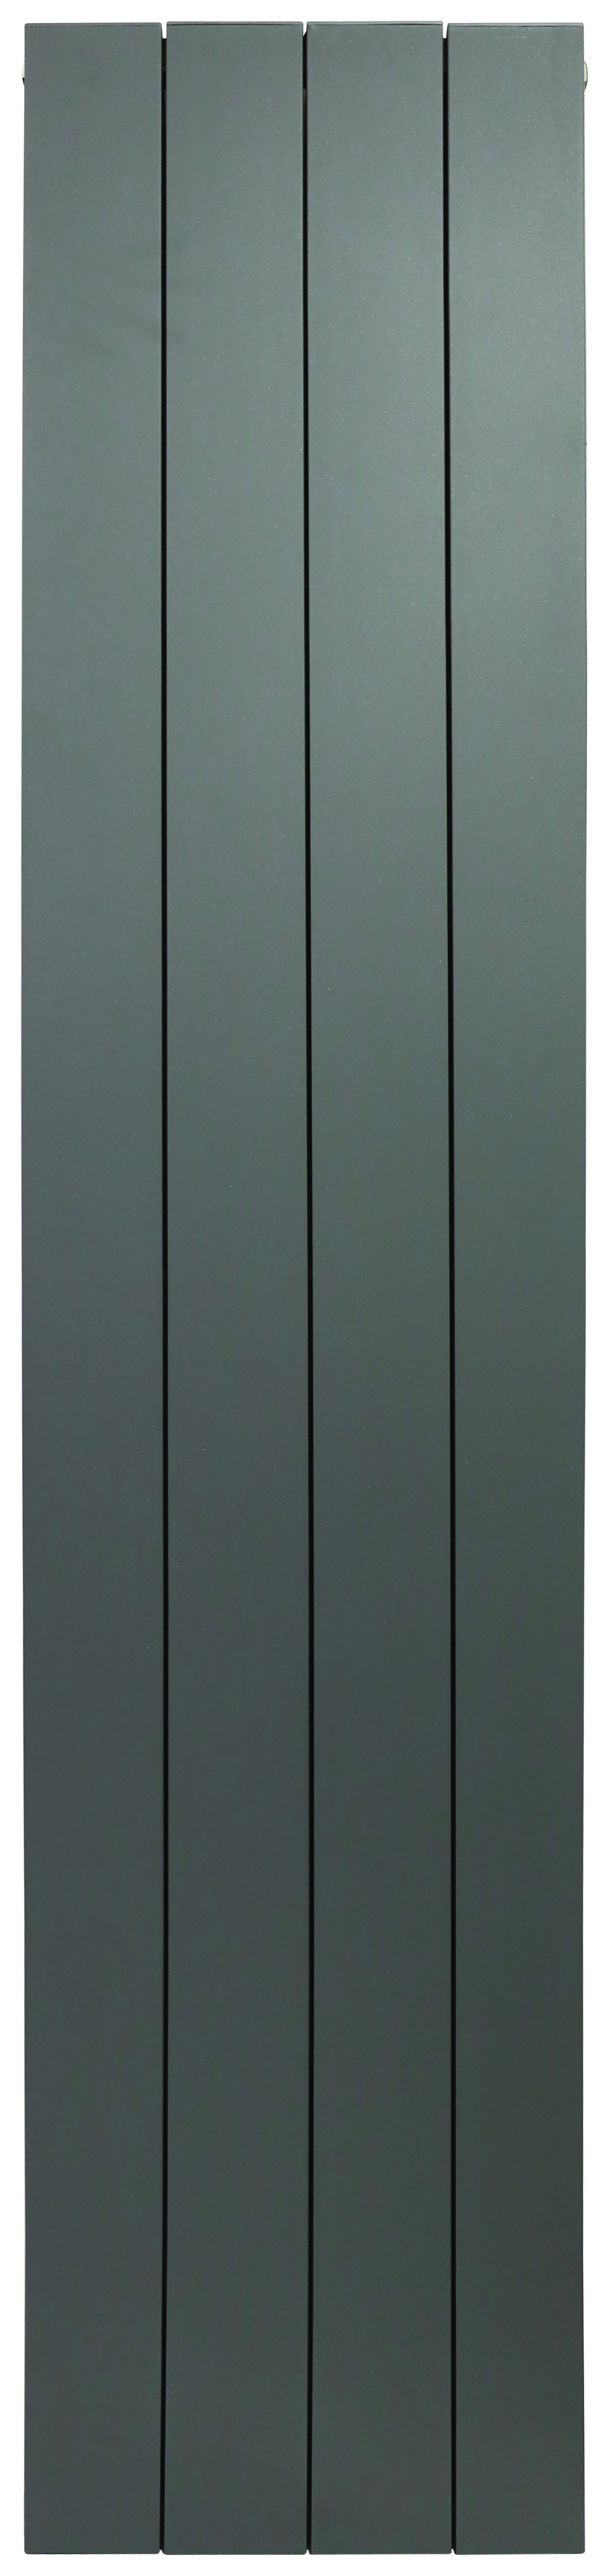 Towelrads Ascot Double Vertical Designer Radiator - Anthracite 1800mm - Various Widths Available